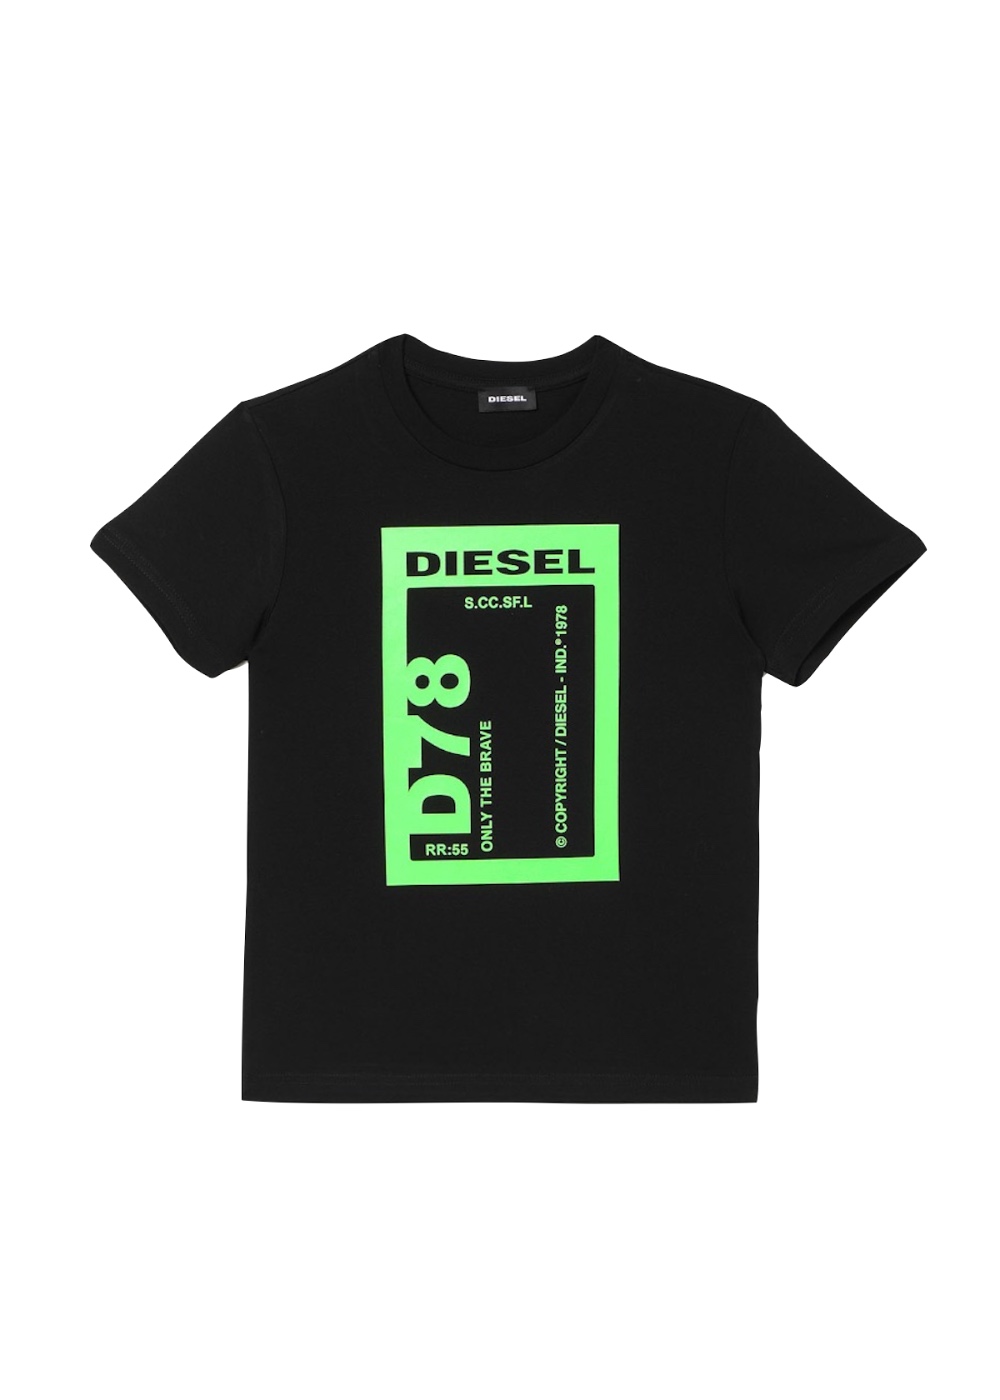 Featured image for “DIESEL TFULL78”